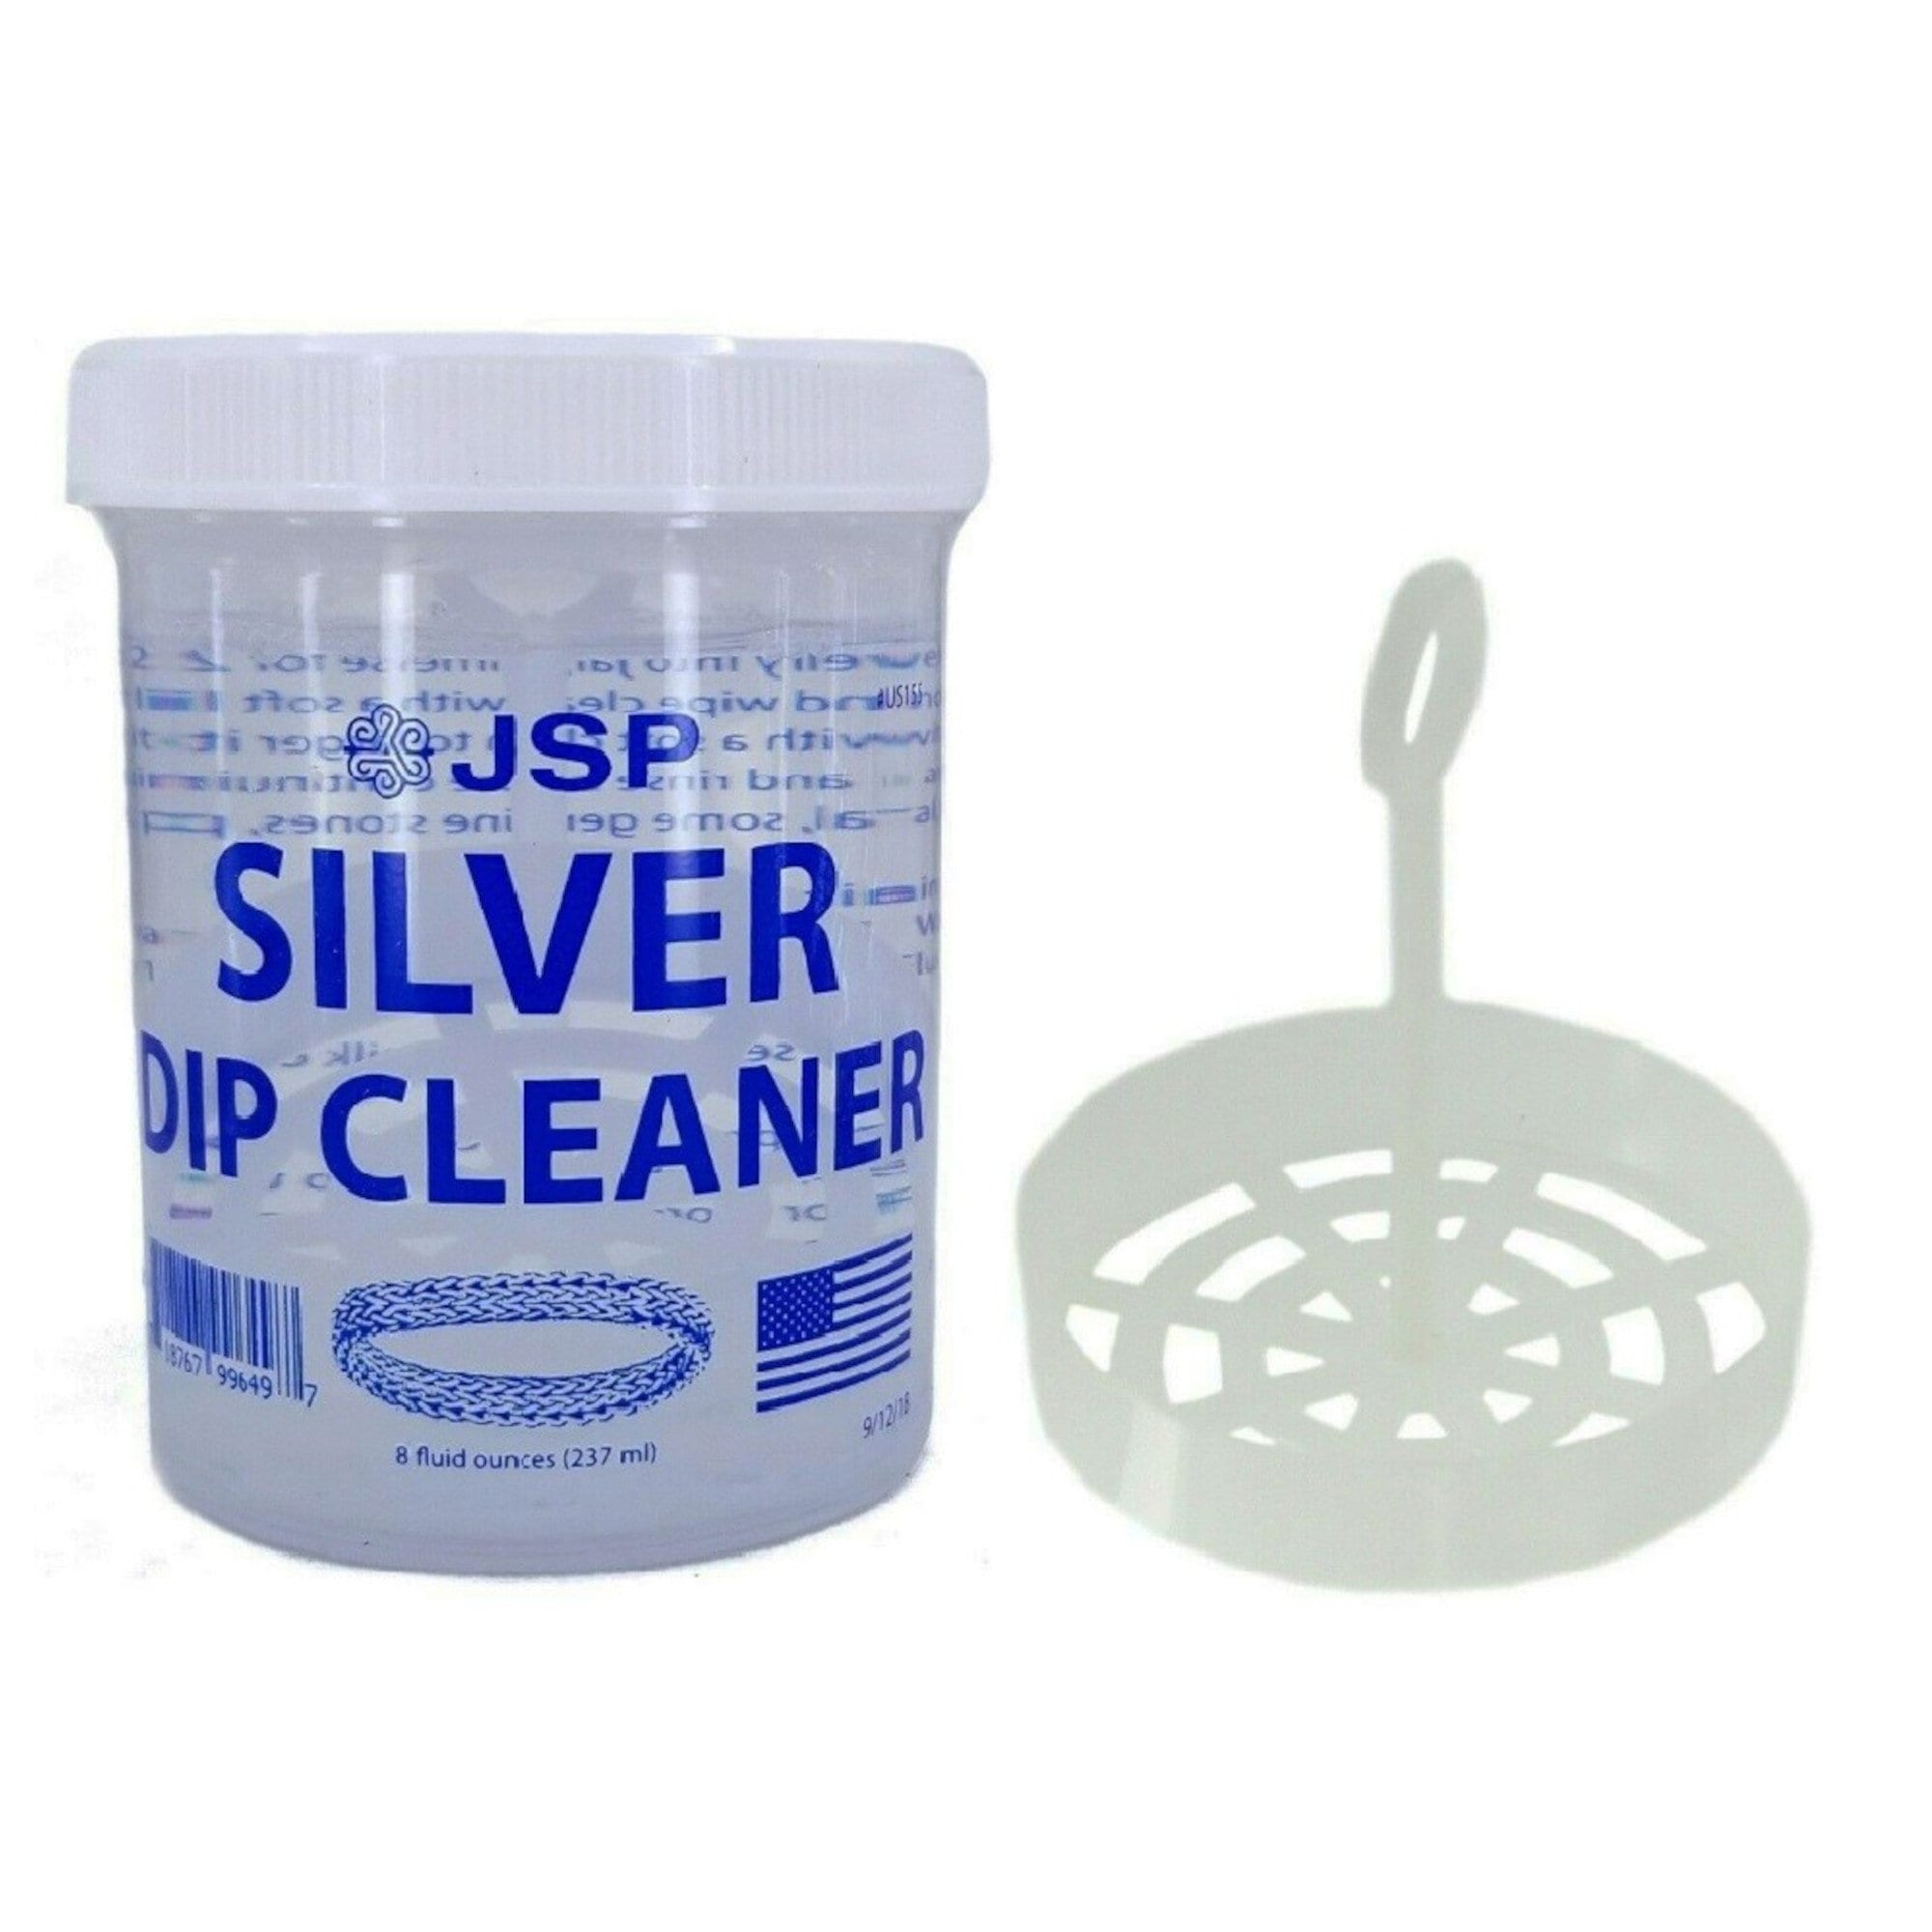 Silver Dip Jewelry Cleaner, Cloth Cleaning Shines And Protect